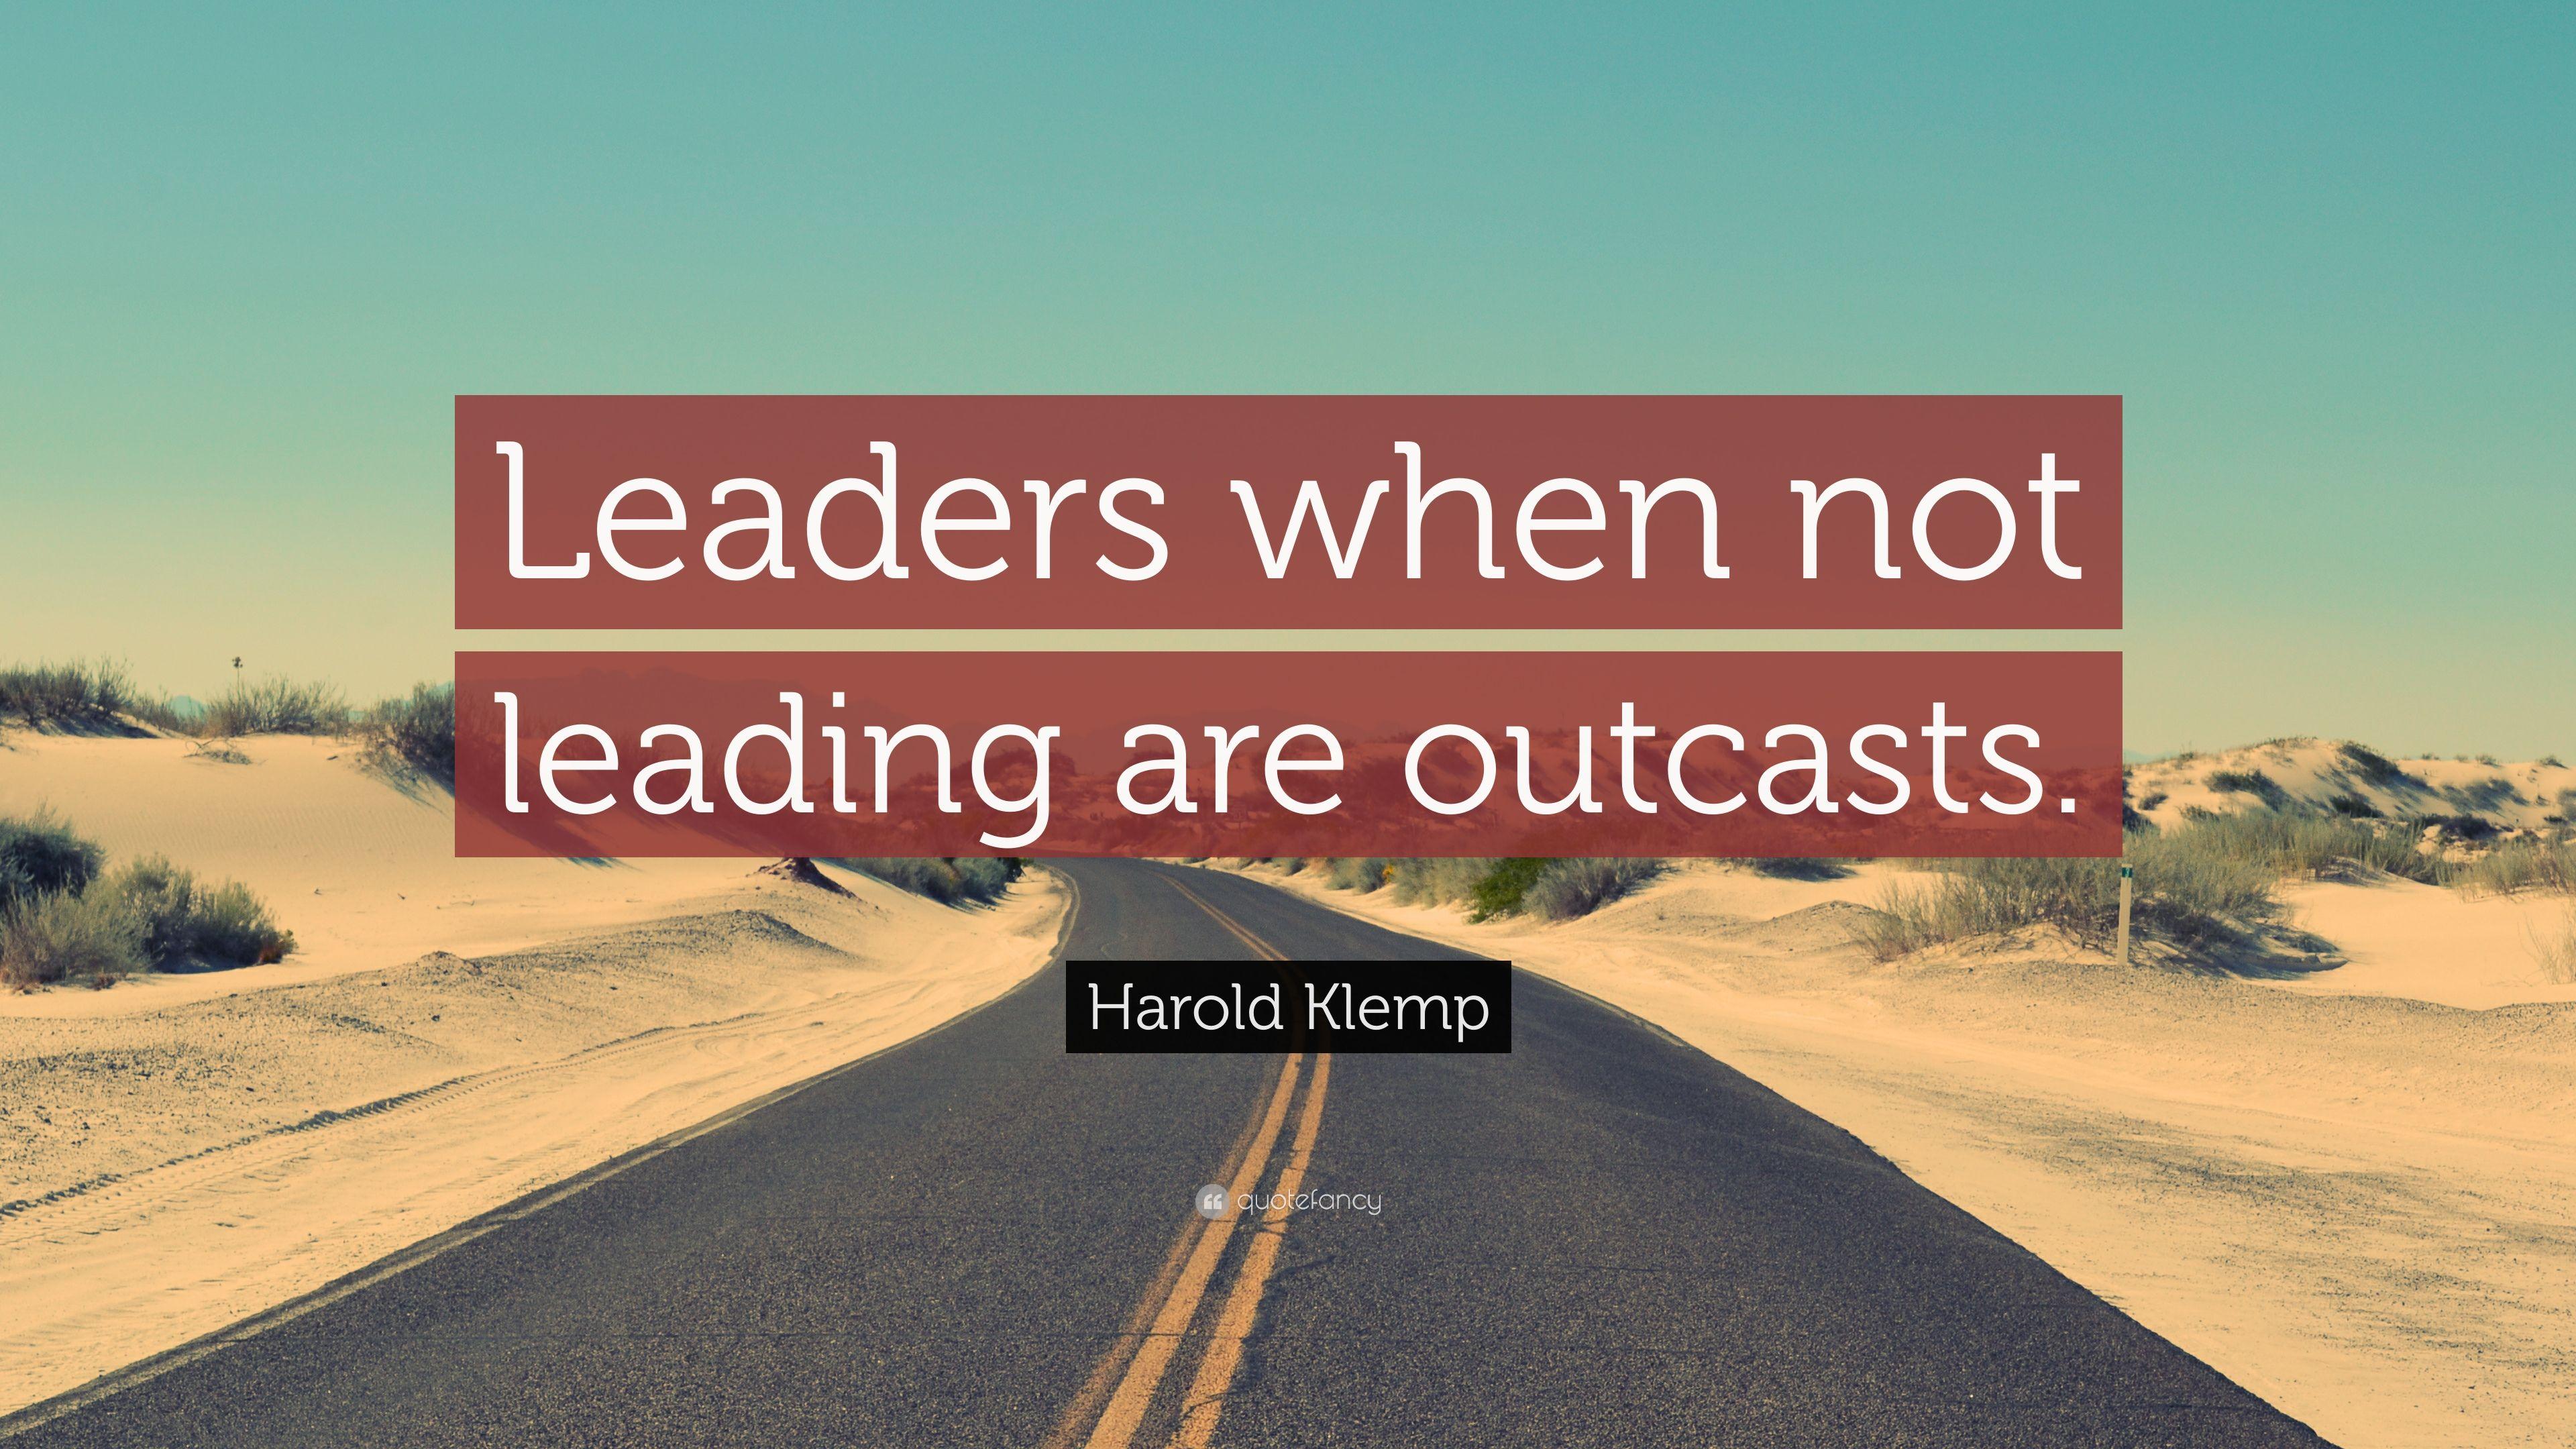 Harold Klemp Quote: “Leaders when not leading are outcasts.” 7